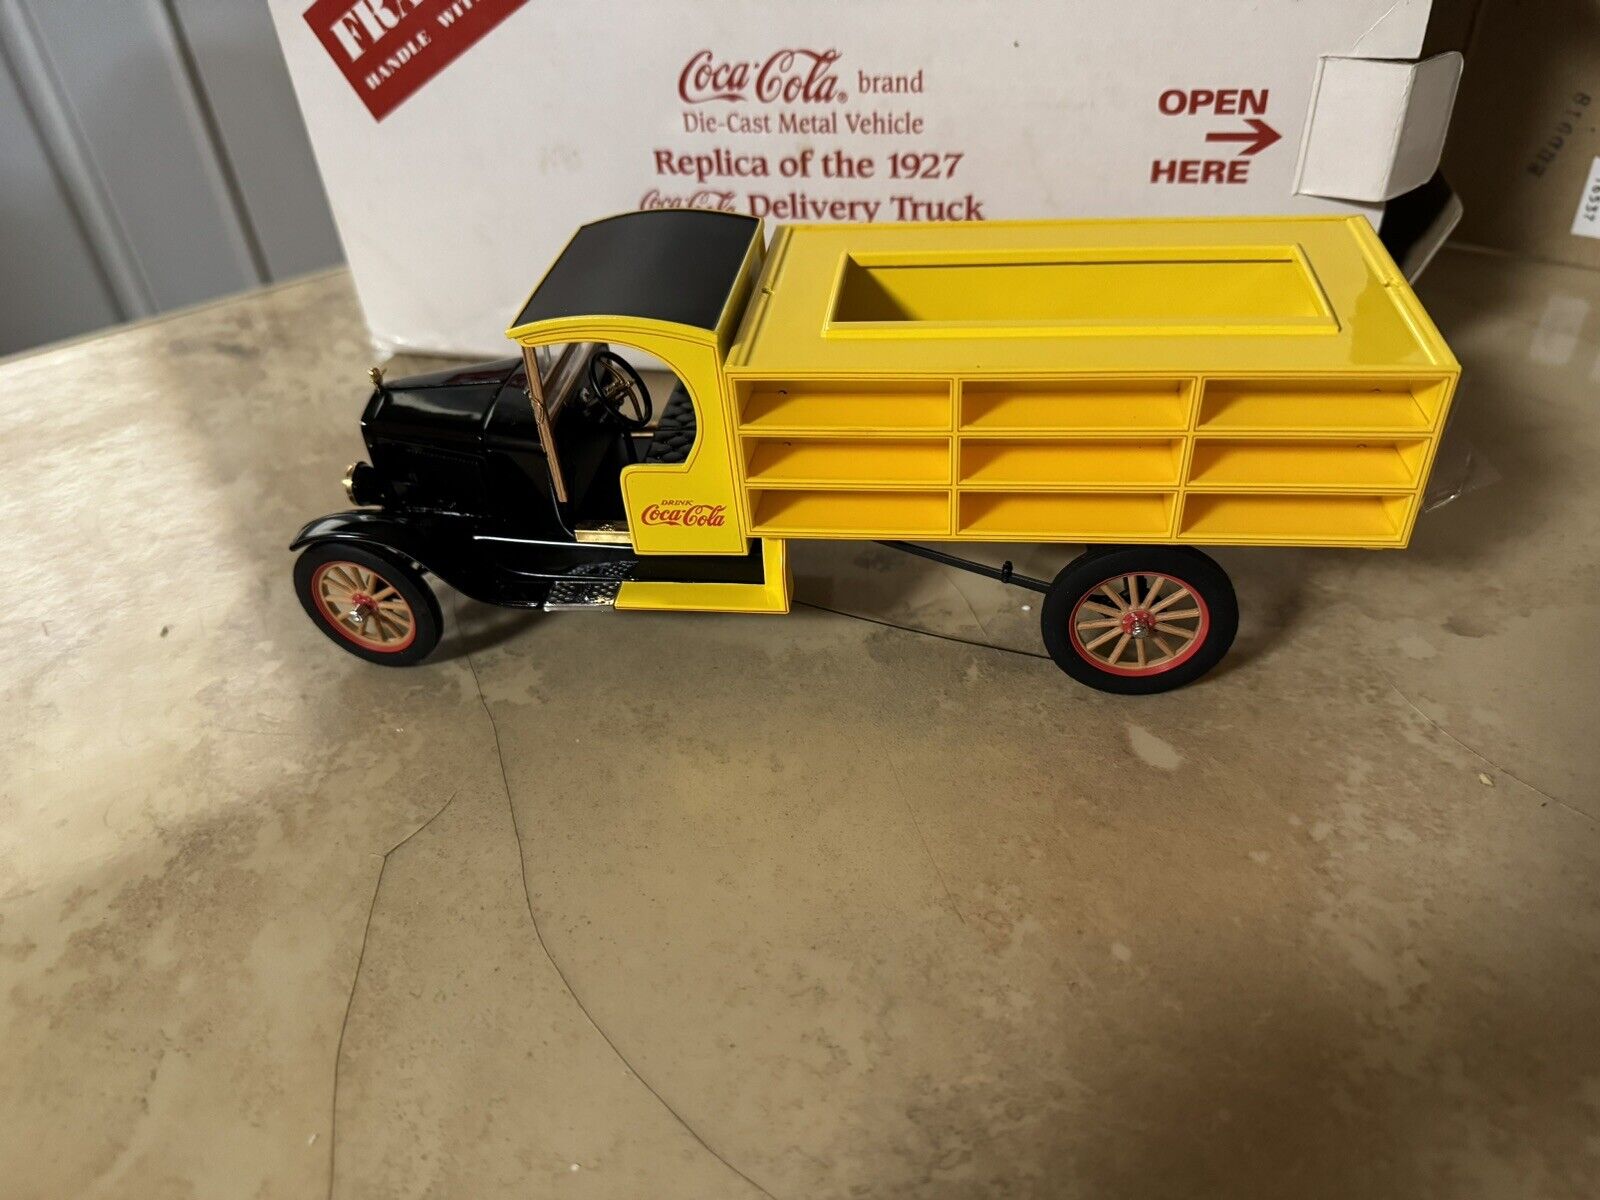 Coca Cola Die Cast Metal Vehicle Replica of the 1927 Delivery Truck